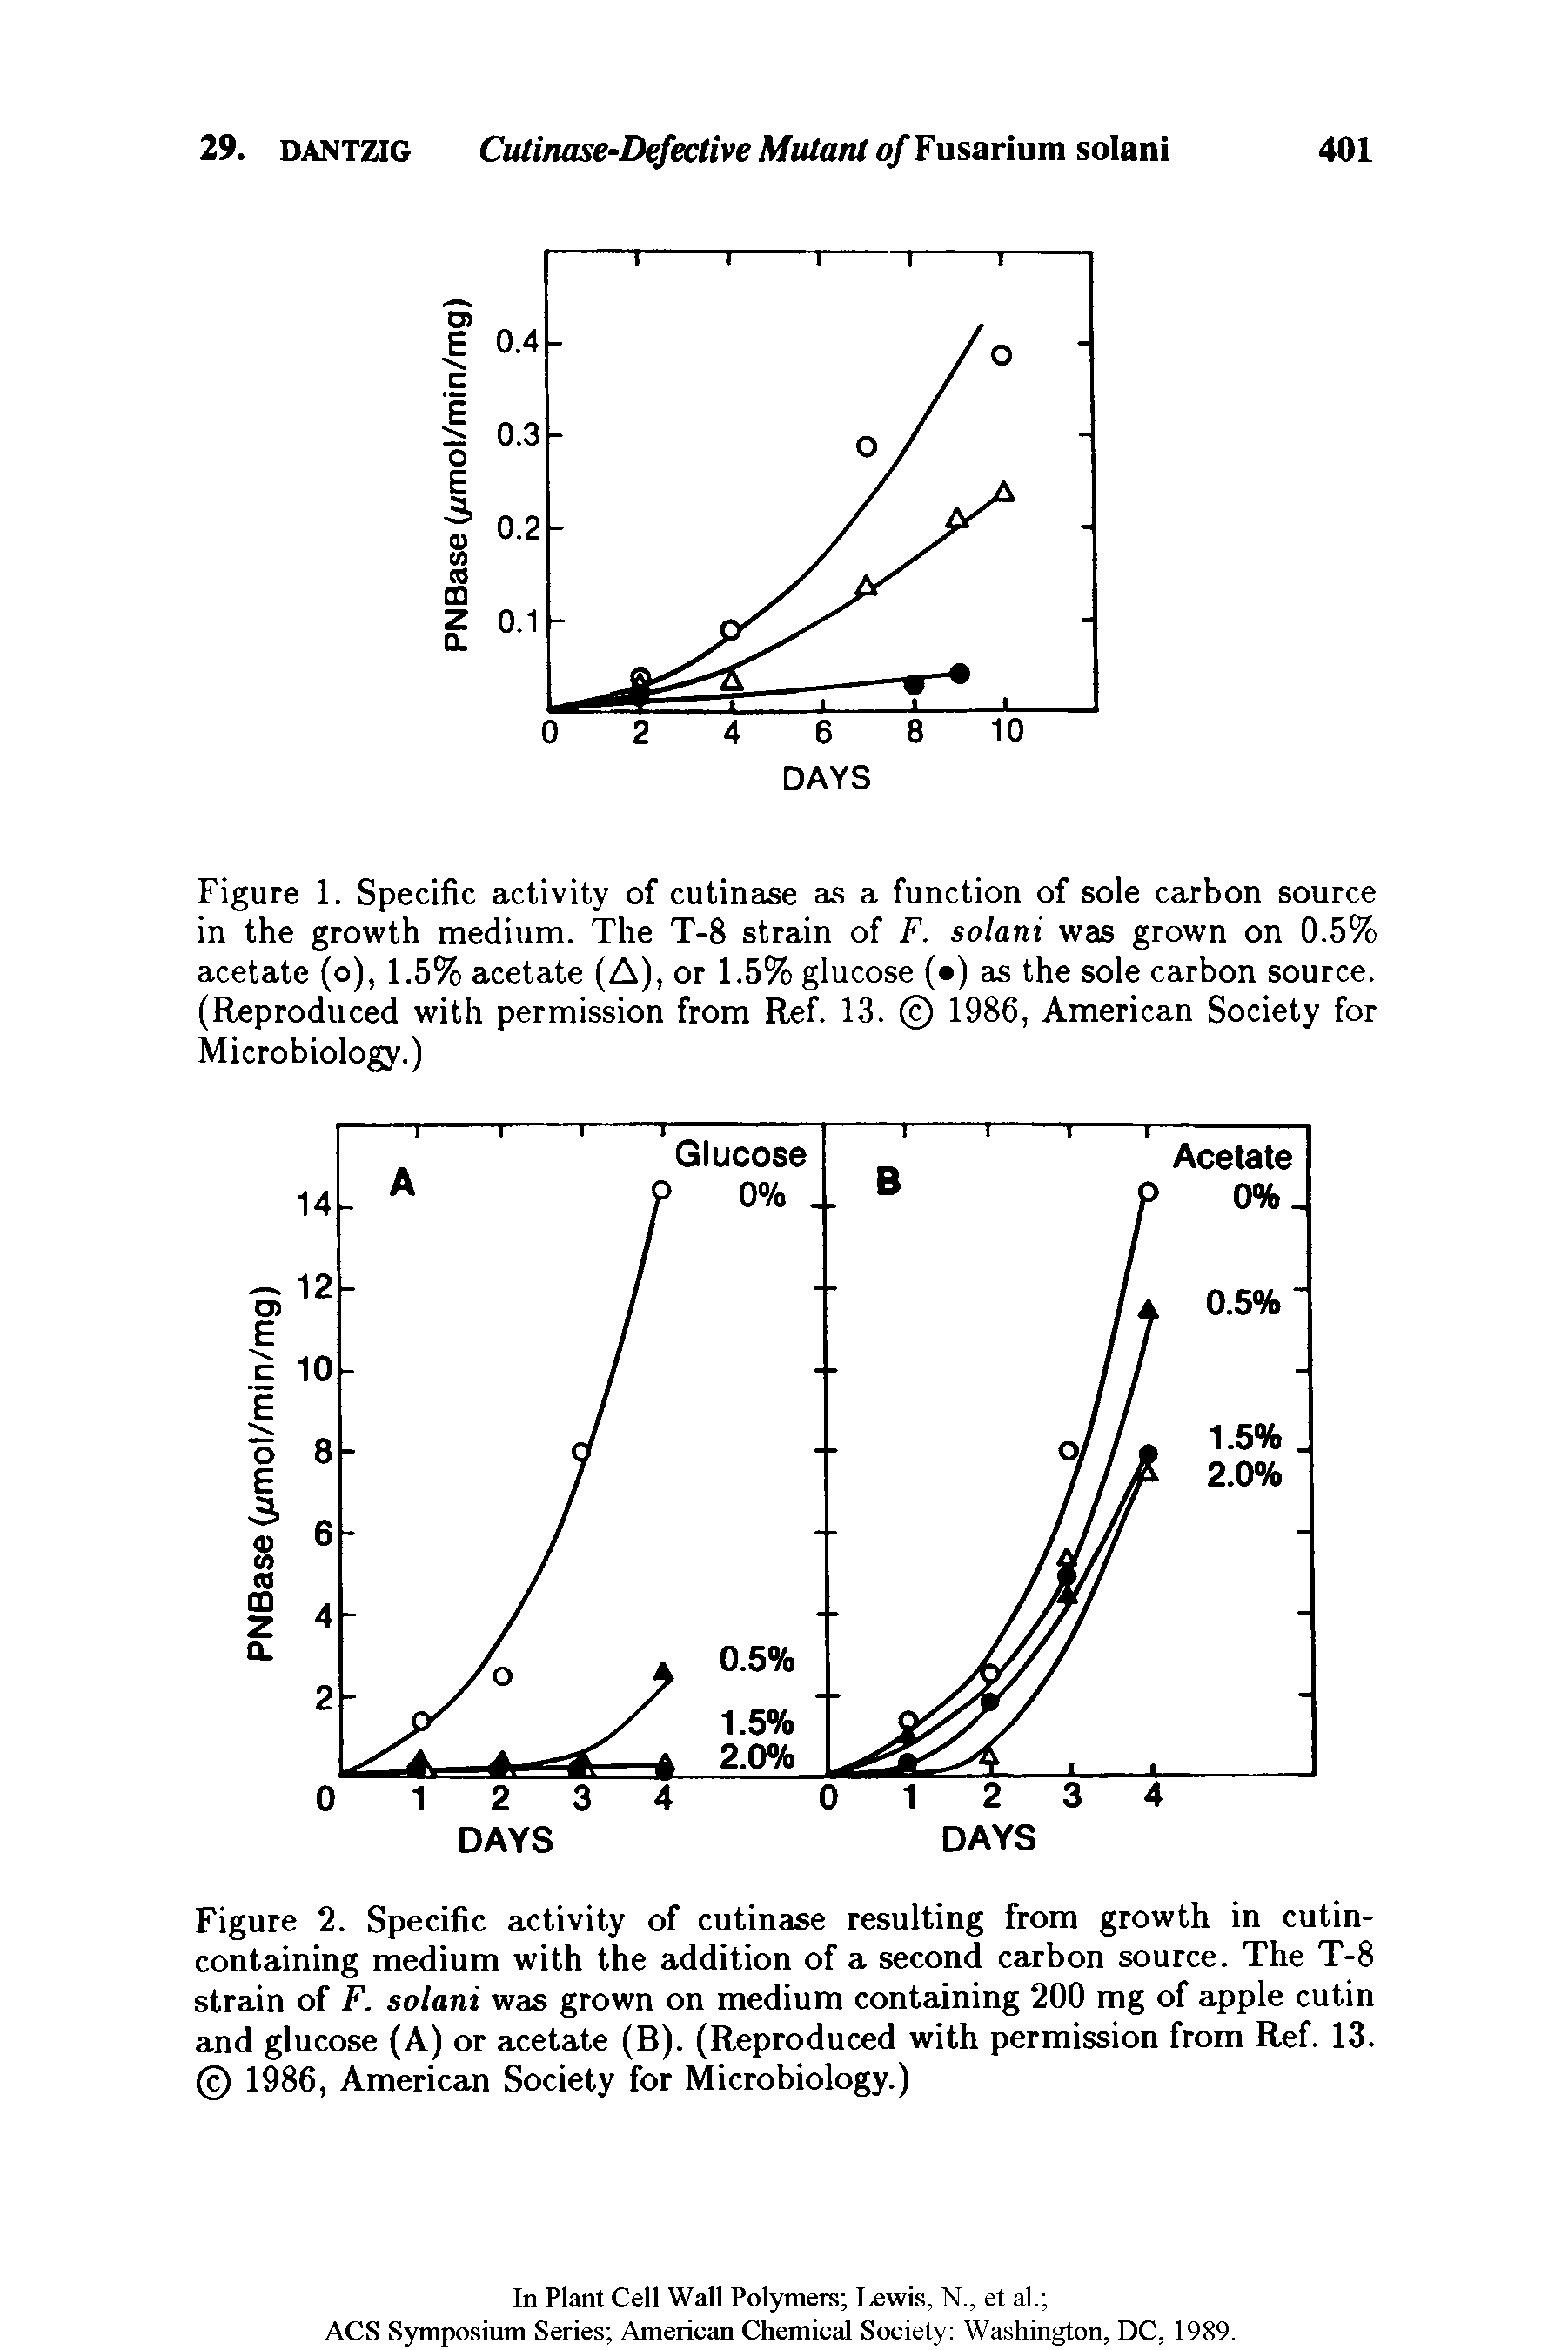 Figure 1. Specific activity of cutinase as a function of sole carbon source in the growth medium. The T-8 strain of F. solani was grown on 0.5% acetate (o), 1.5% acetate (A), or 1.5% glucose ( ) as the sole carbon source. (Reproduced with permission from Ref. 13. 1986, American Society for Microbiology.)...